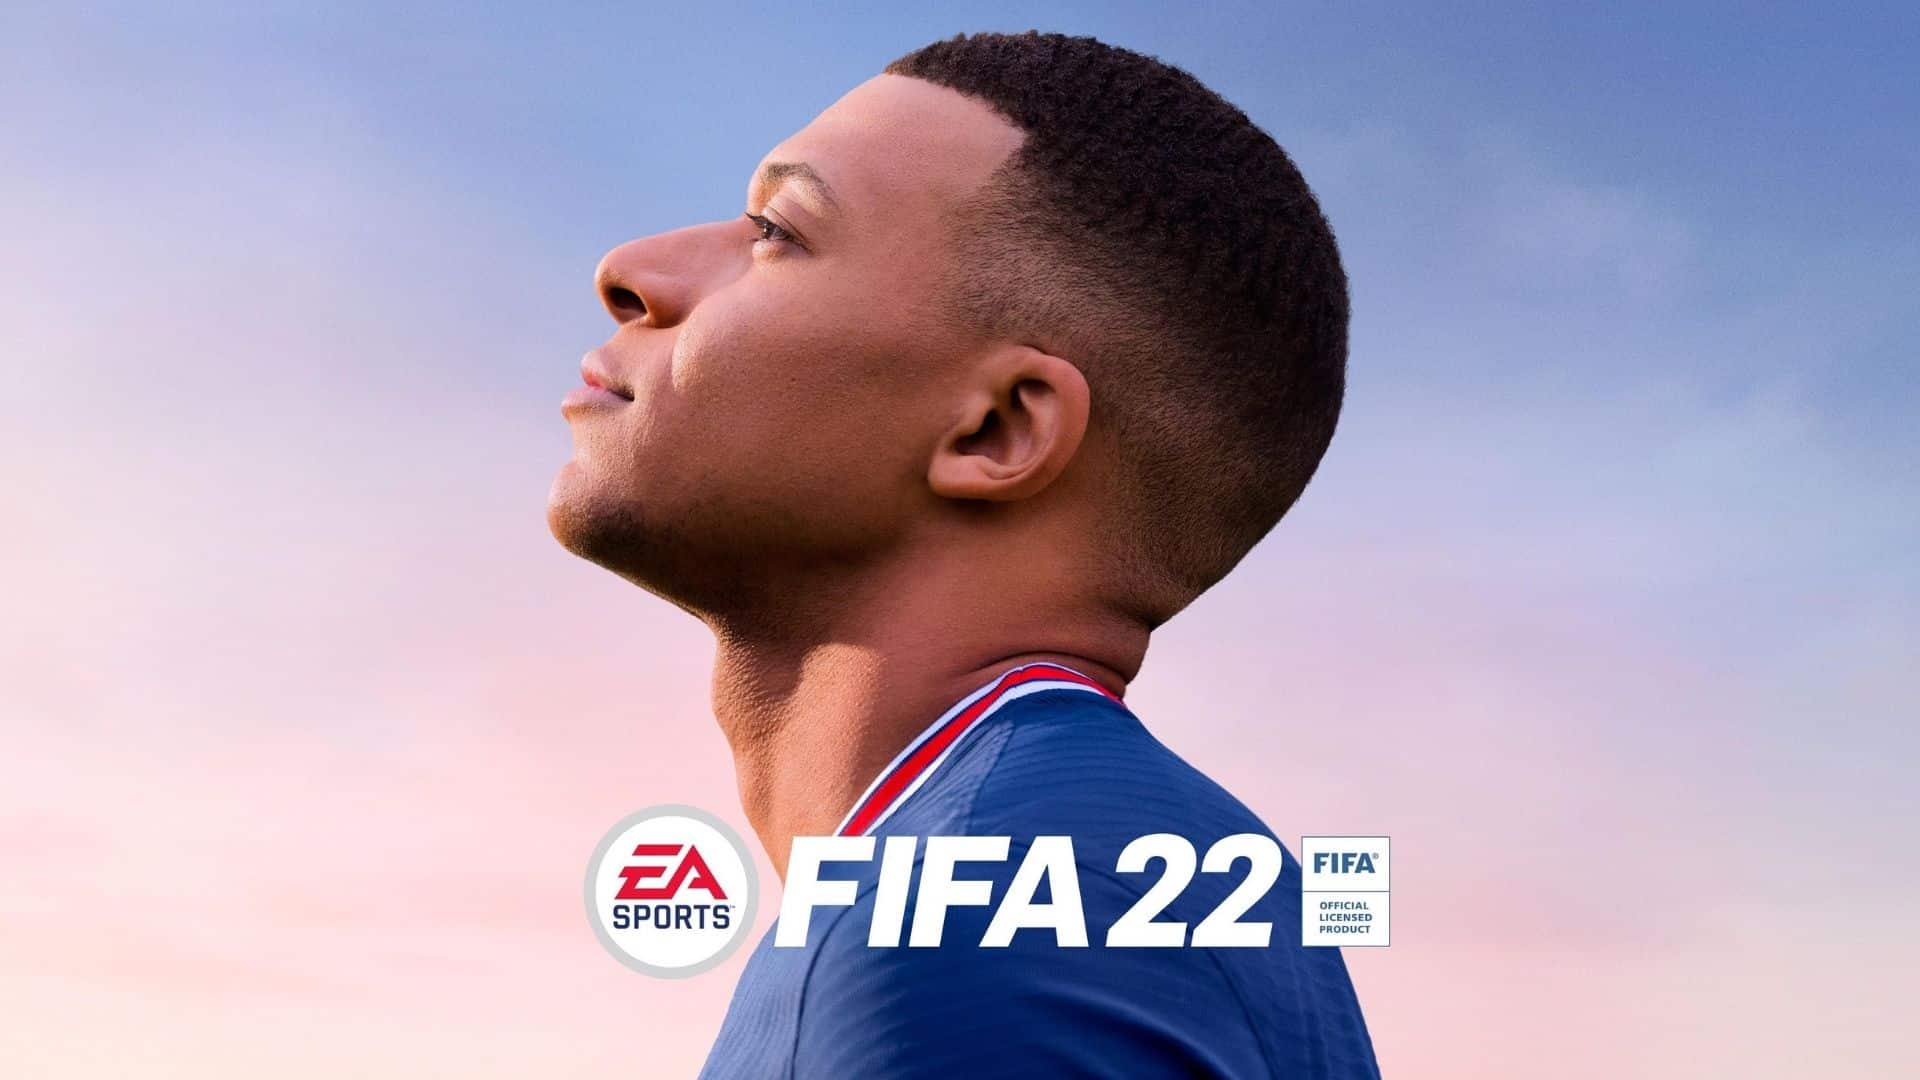 FIFA 22 console versions will have technology that PCs can’t handle